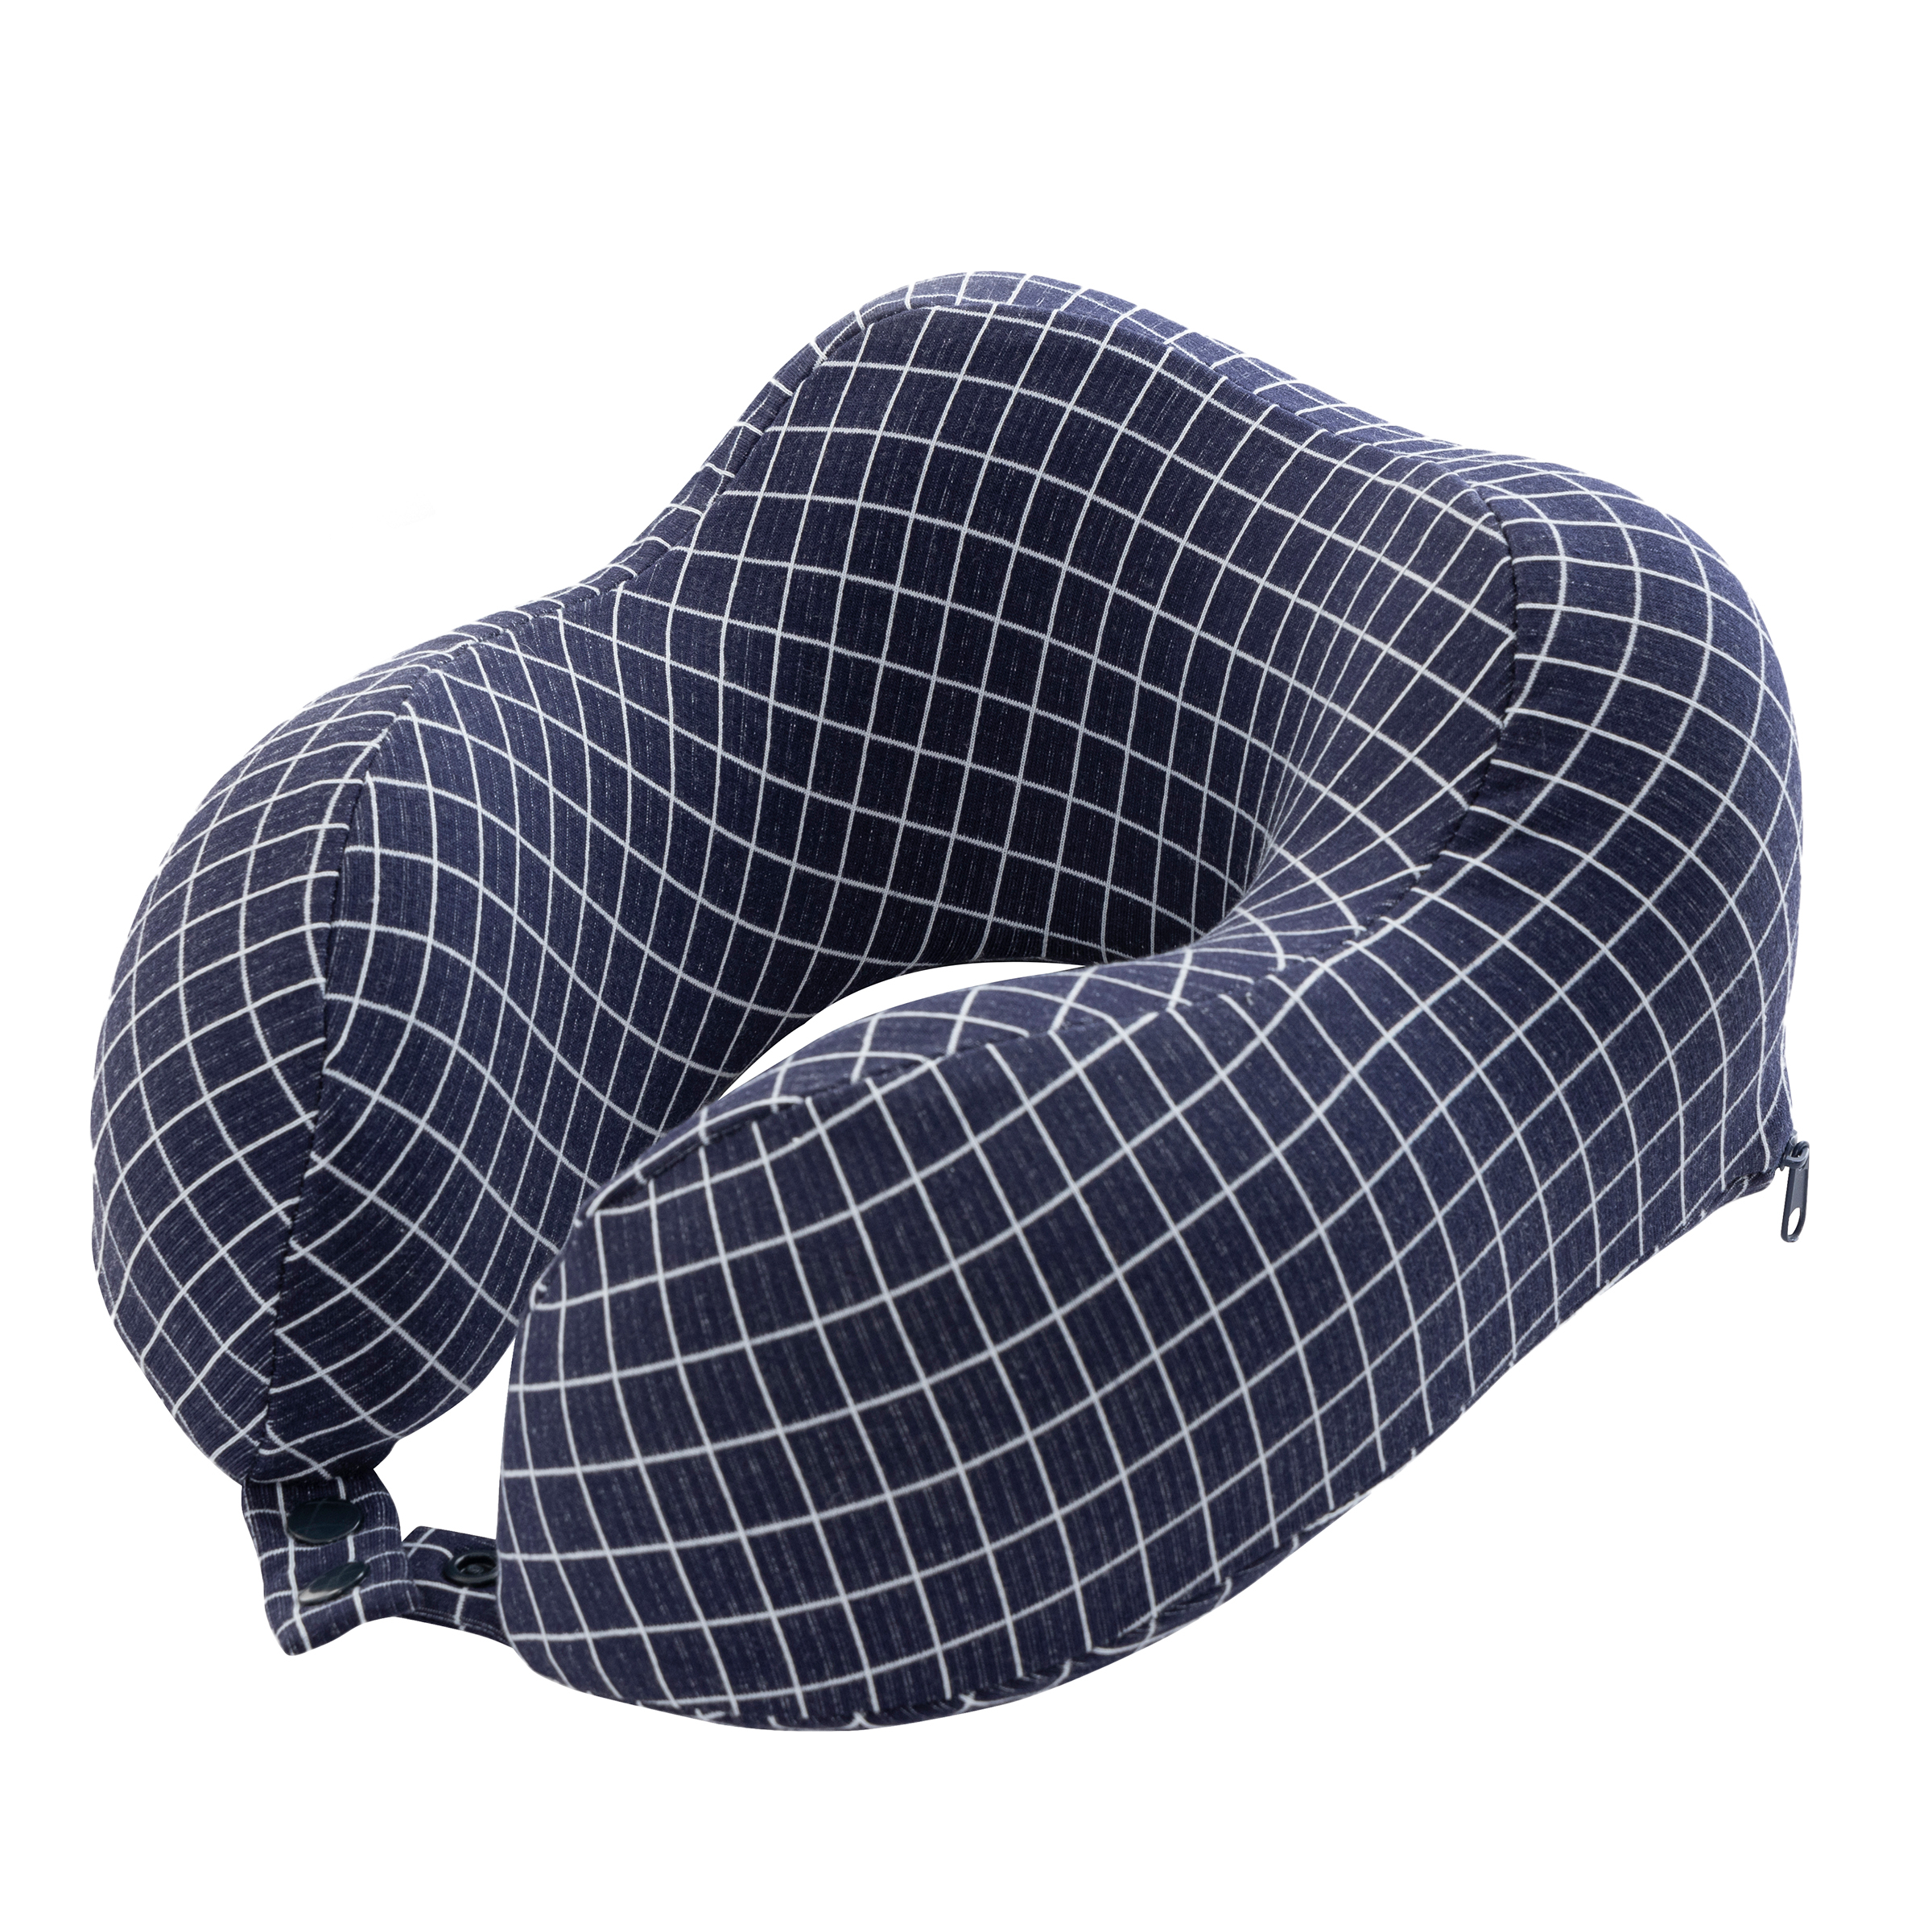 Travel Pillow - Memory Foam Pillow With Washable Cover - Neck Pillows For Sleeping On Airplanes, Trains, And Cars By Home-Complete (Navy)